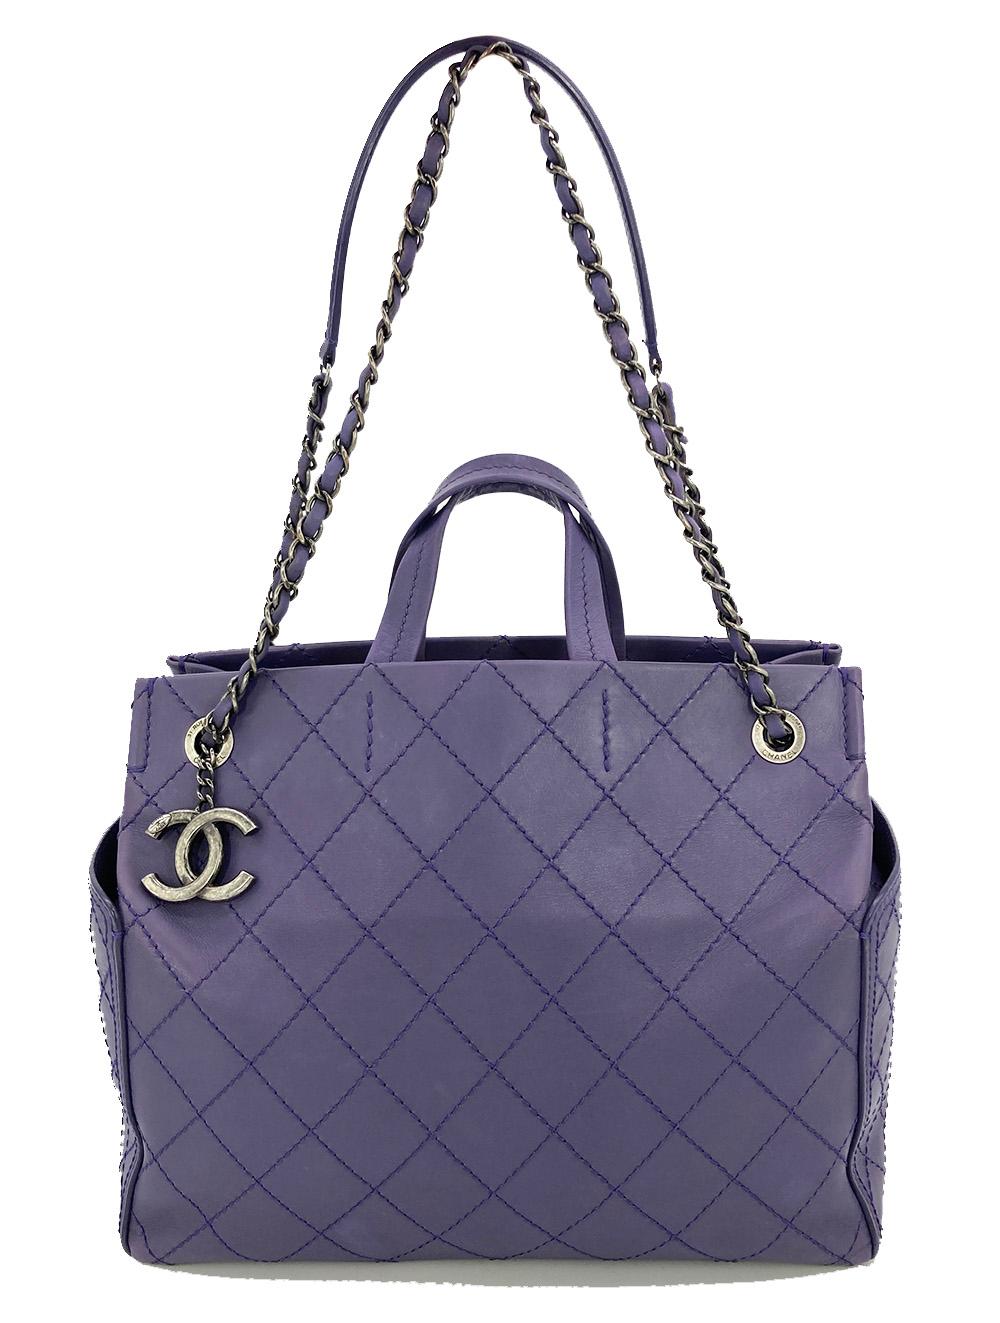 Chanel Purple Leather Top Stitch CC Pocket Tote in good condition. Purple quilted lambskin exterior with matching top stitching diamond quilt. Antiqued ruthenium hardware.  Exterior side pockets. Woven chain and leather shoulder strap which can be